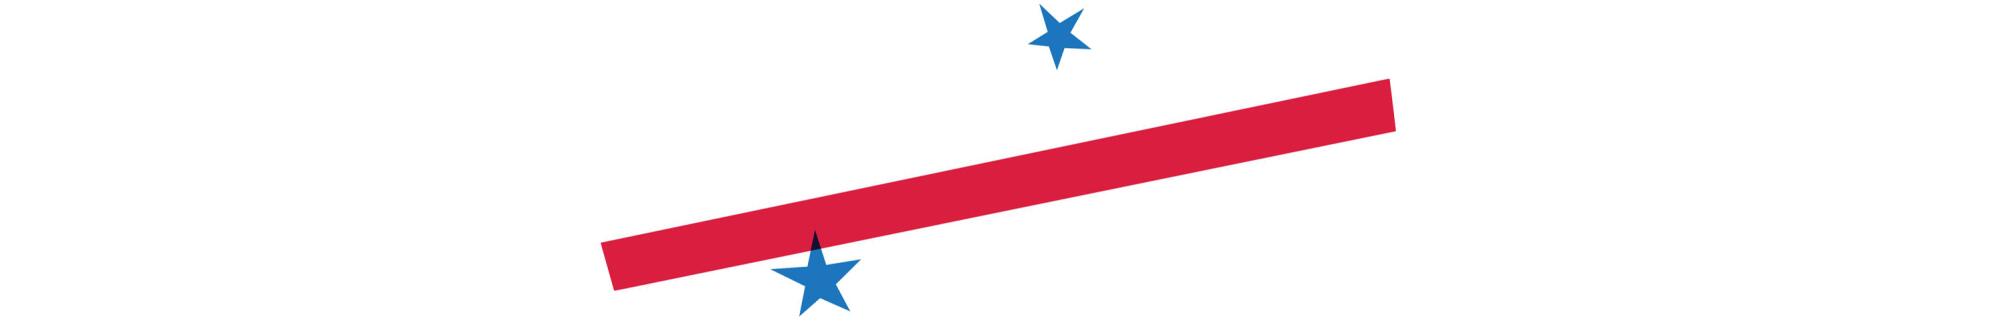 red strip and two blue stars